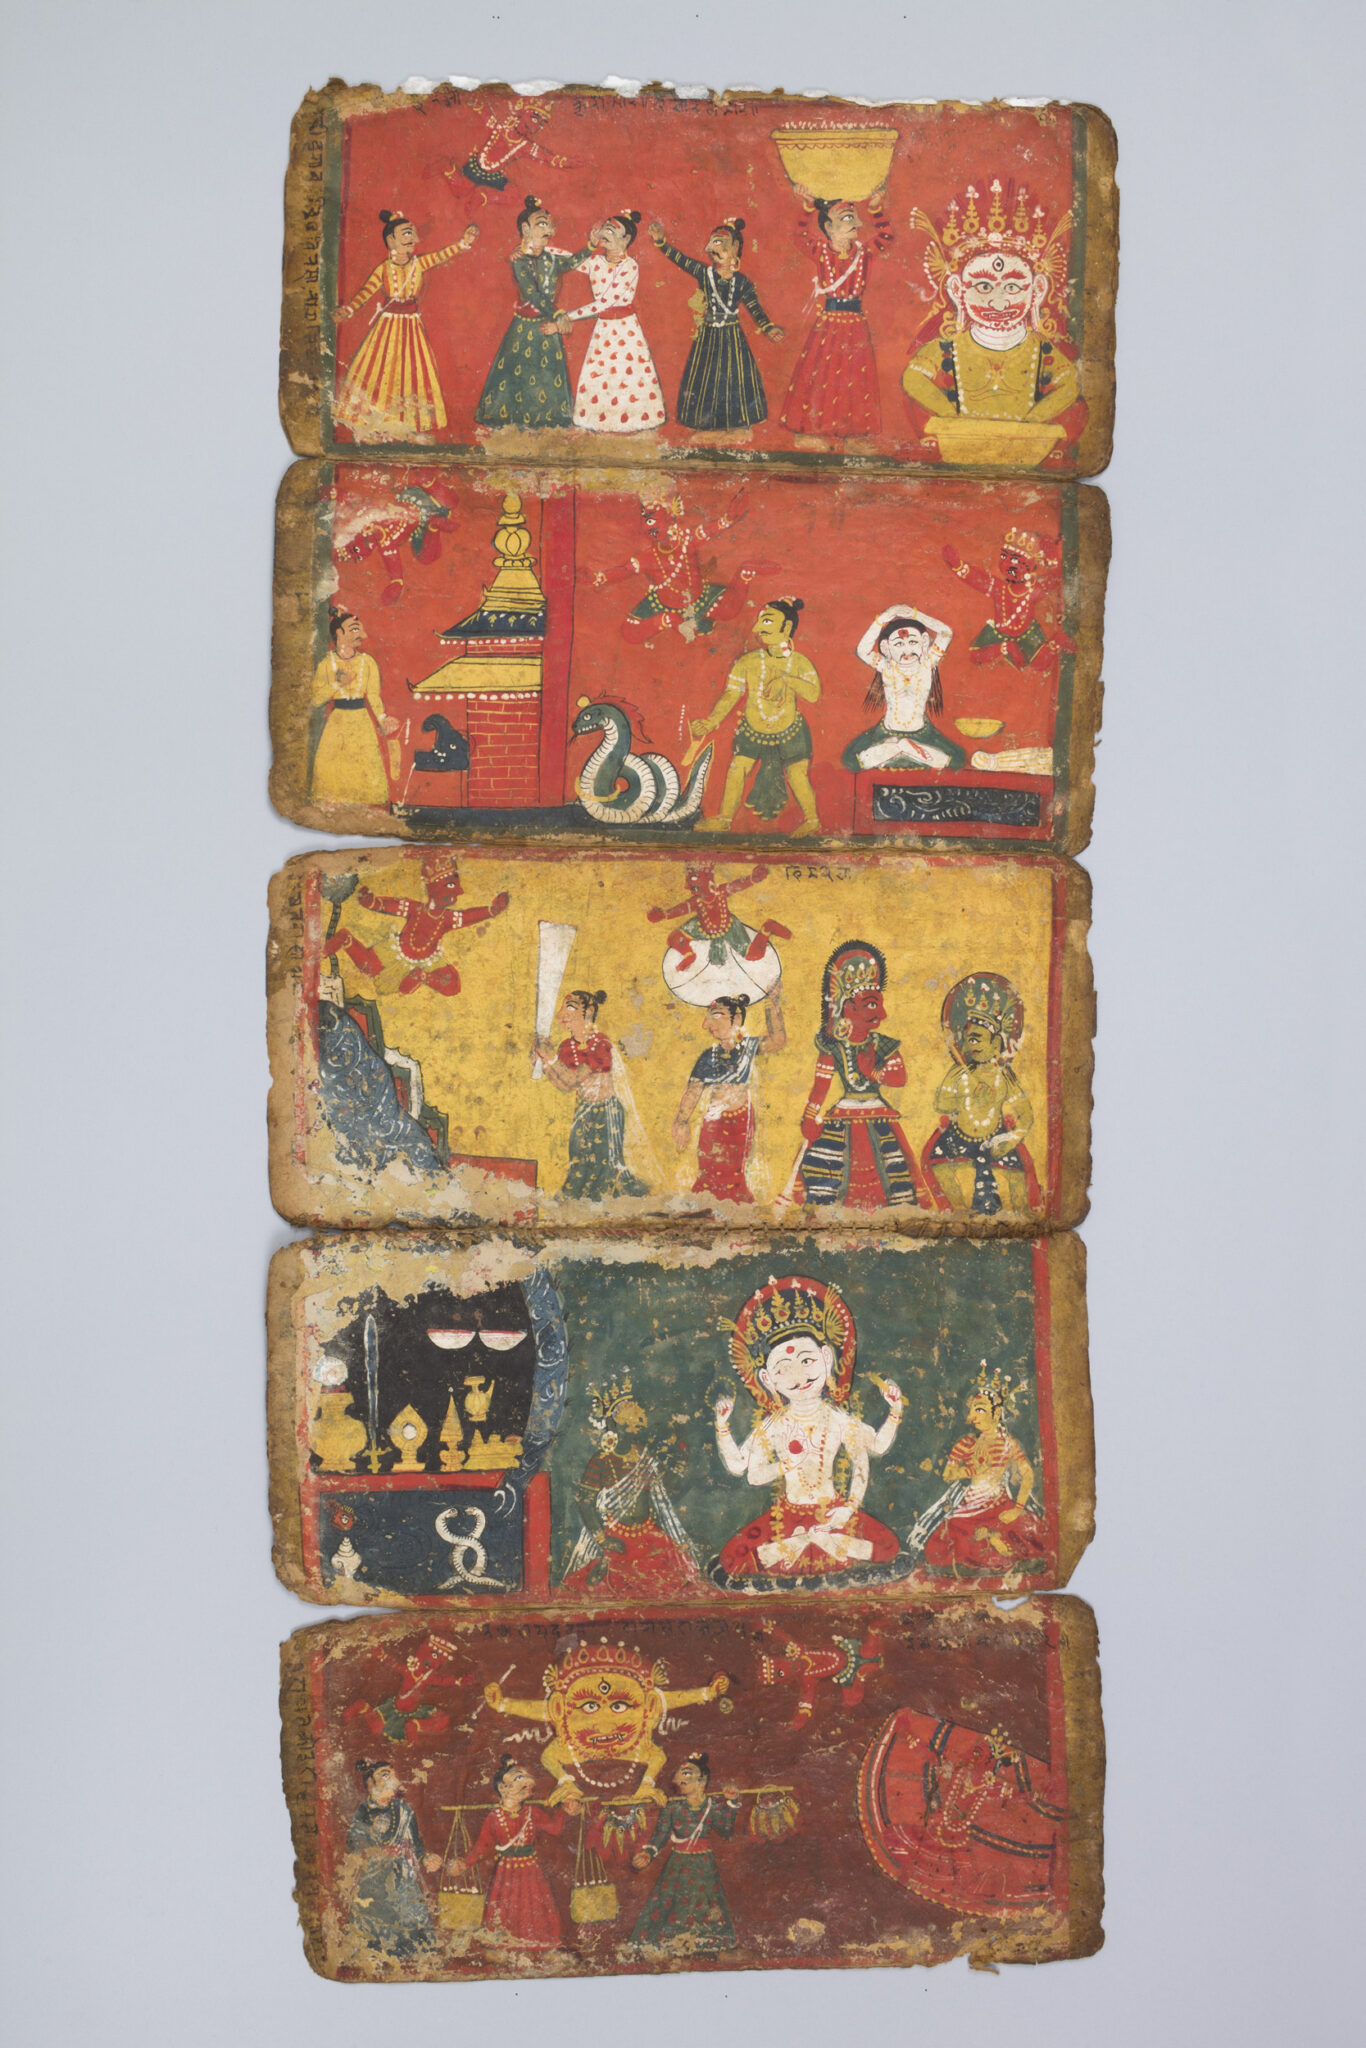 Five small rectangular paintings arranged in column depicting scenes featuring deities, animals, and spiritual implements